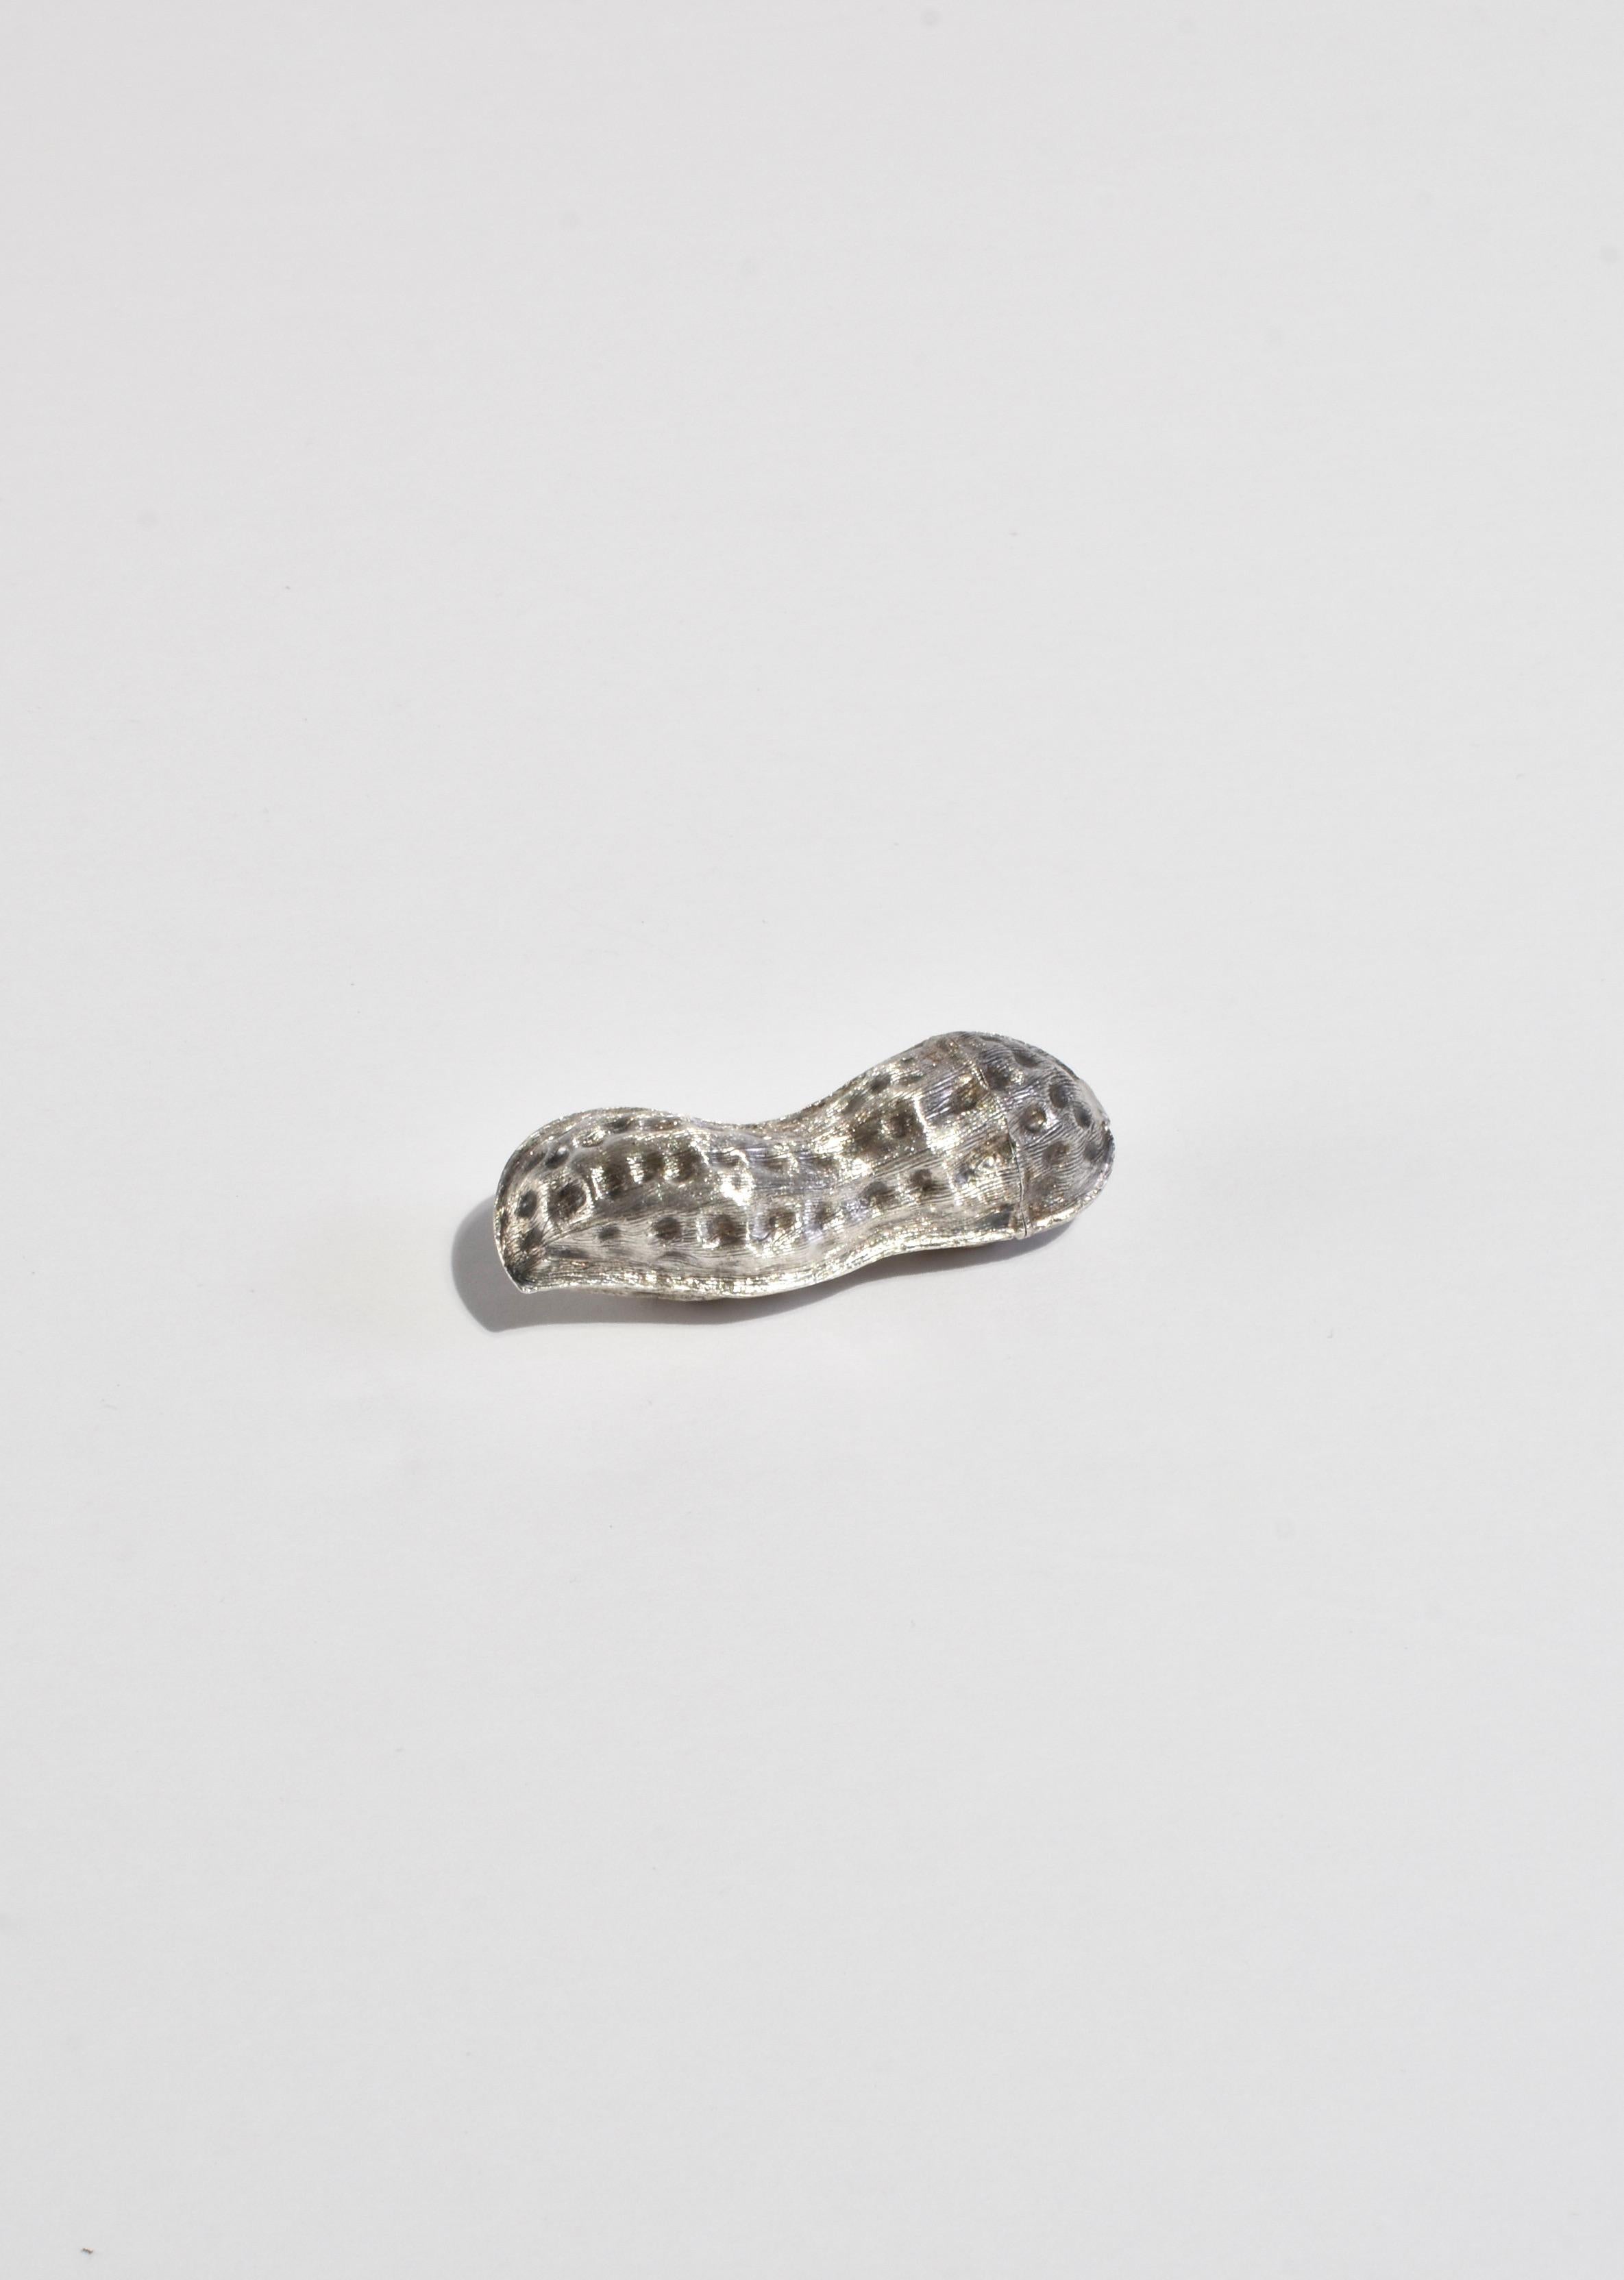 Vintage hand-crafted sterling pill box in the shape of a peanut.